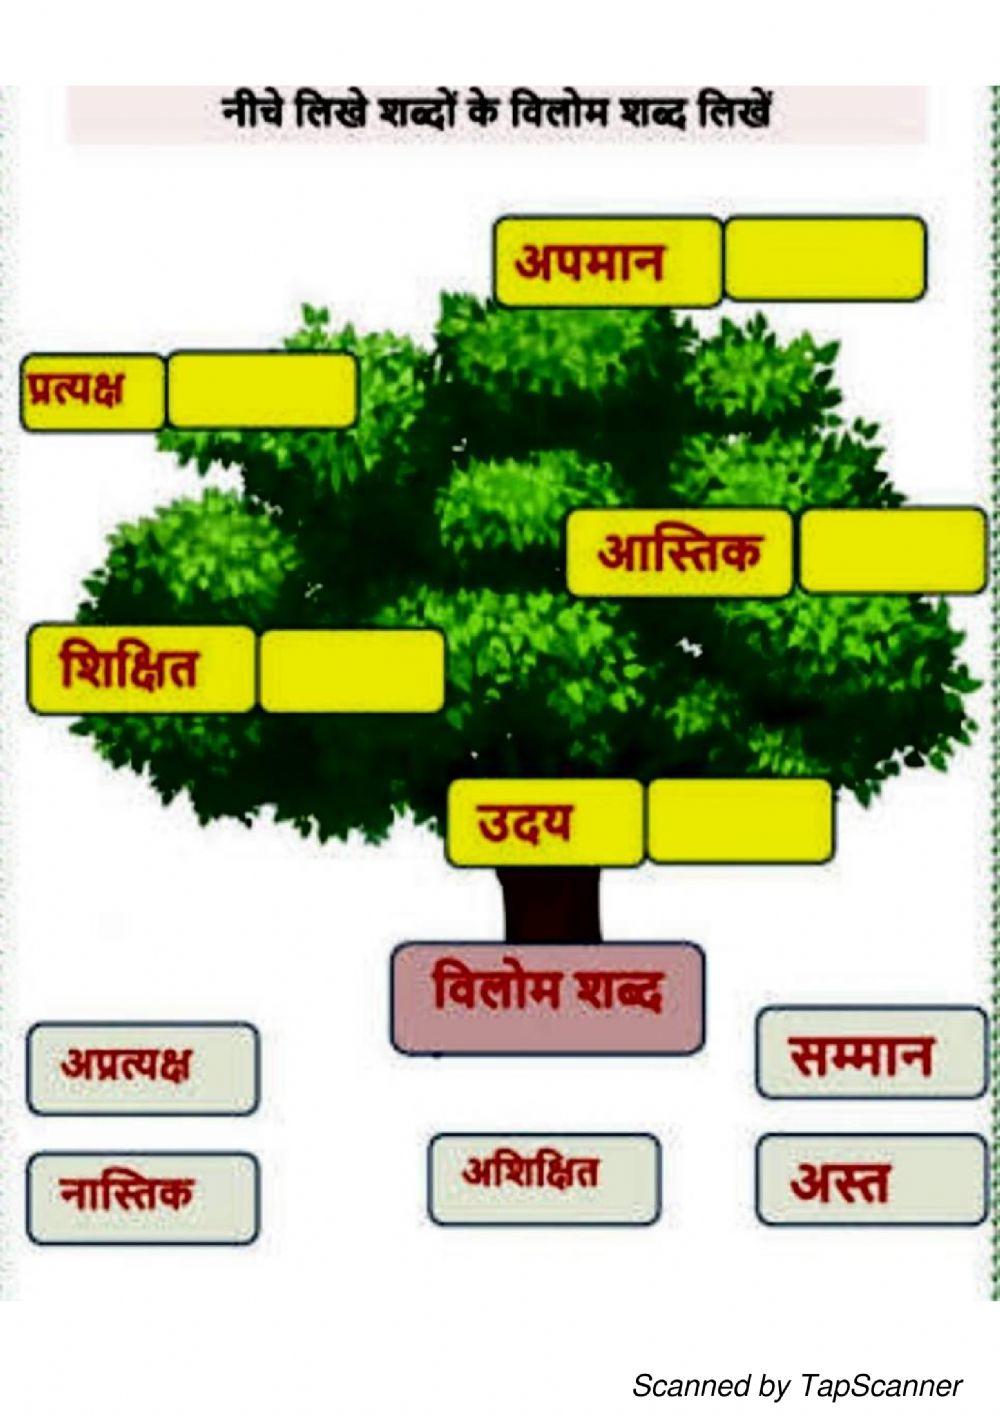 Opposite words in hindi class 2